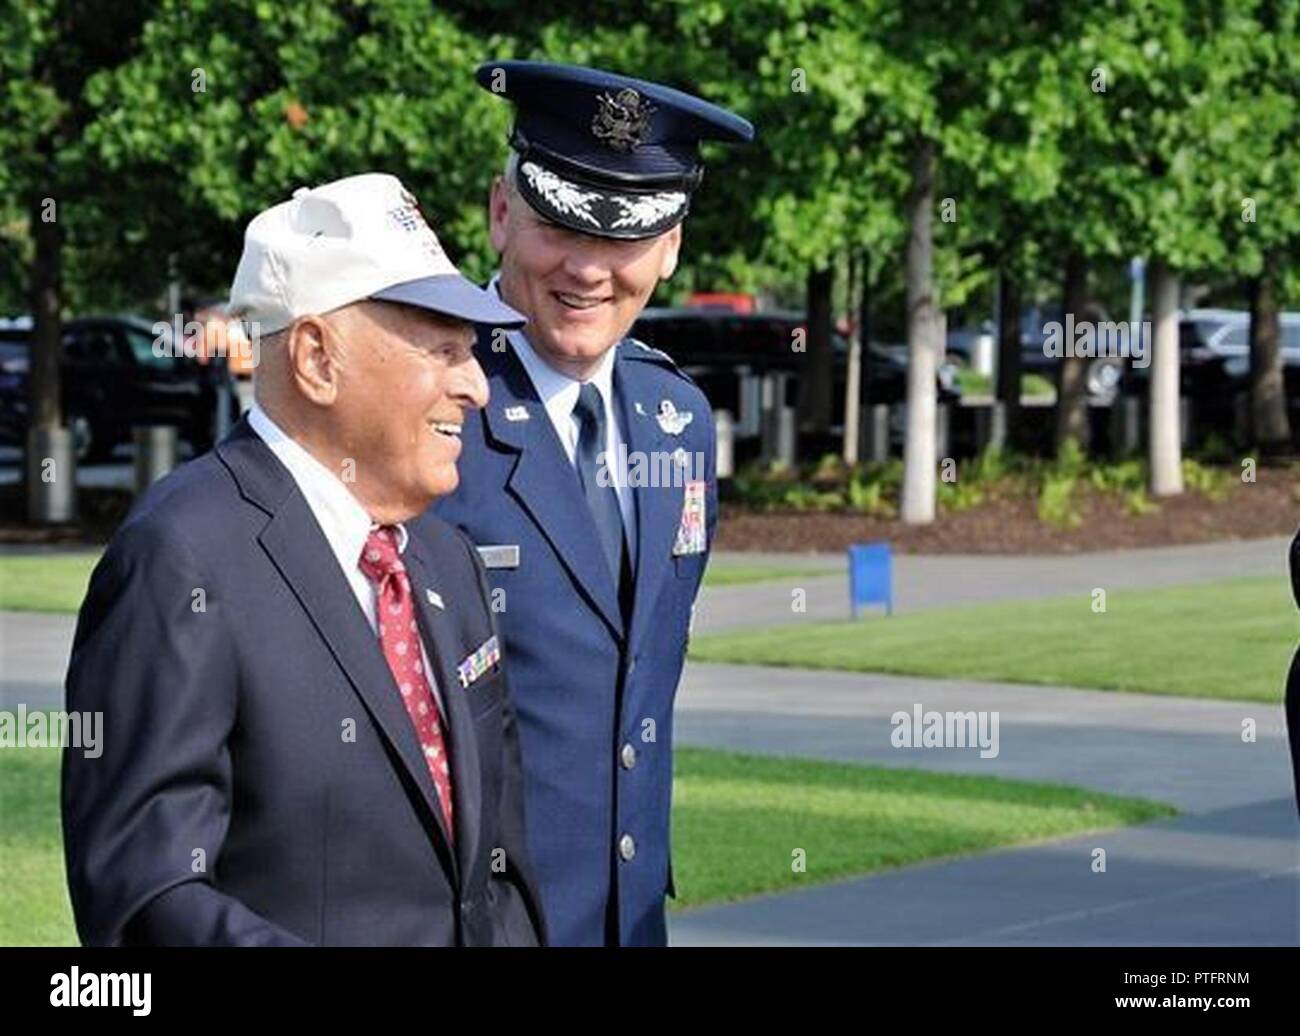 Maj. Gen. James A. Jacobson (right), Air Force District of Washington commander, walks beside World War II veteran, Lt. John Pedevillano, at the beginning of a Purple Heart award presentation ceremony July 14, 2017 at the U.S. Air Force Memorial, Arlington, Va. According to his family, even while injured, Pedevillano saved the lives of his badly-wounded waist gunners by securing their parachutes, pushing them out the side windows and pulling their cords. (Air Force Stock Photo